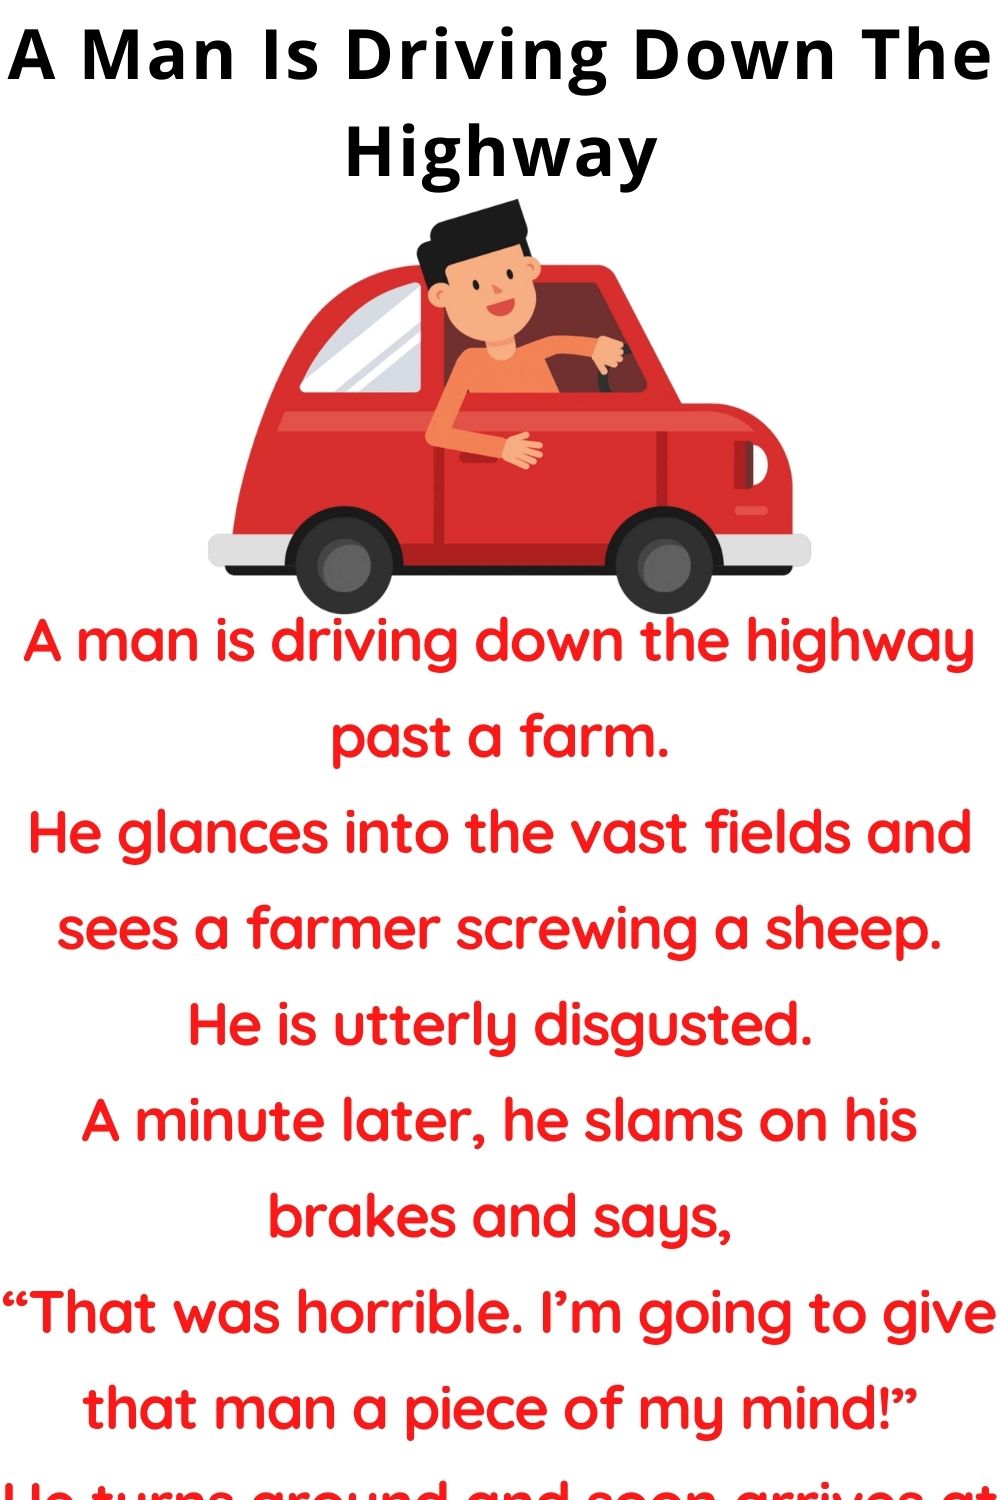 A Man Is Driving Down The Highway